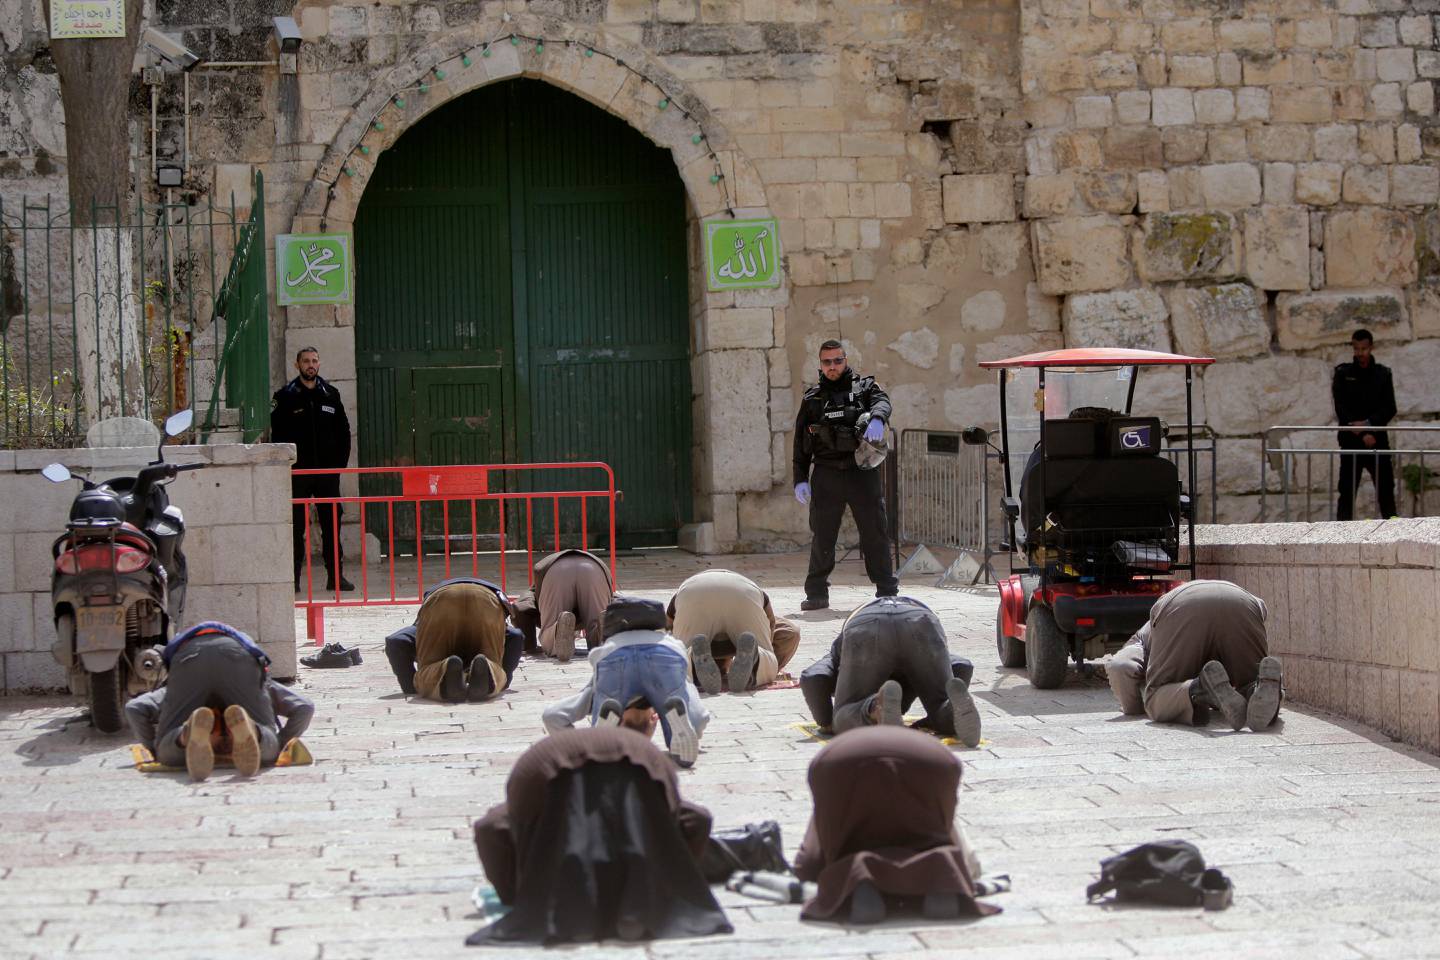 People pray in front of the shuttered gates to al-Aqsa mosque compound as all prayers are suspended to prevent the spread of coronavirus in Jerusalem, Monday, March 23, 2020. In Israel daily life has largely shut down with coronavirus cases multiplying greatly over the past week, (AP Photo/Mahmoud Illean)